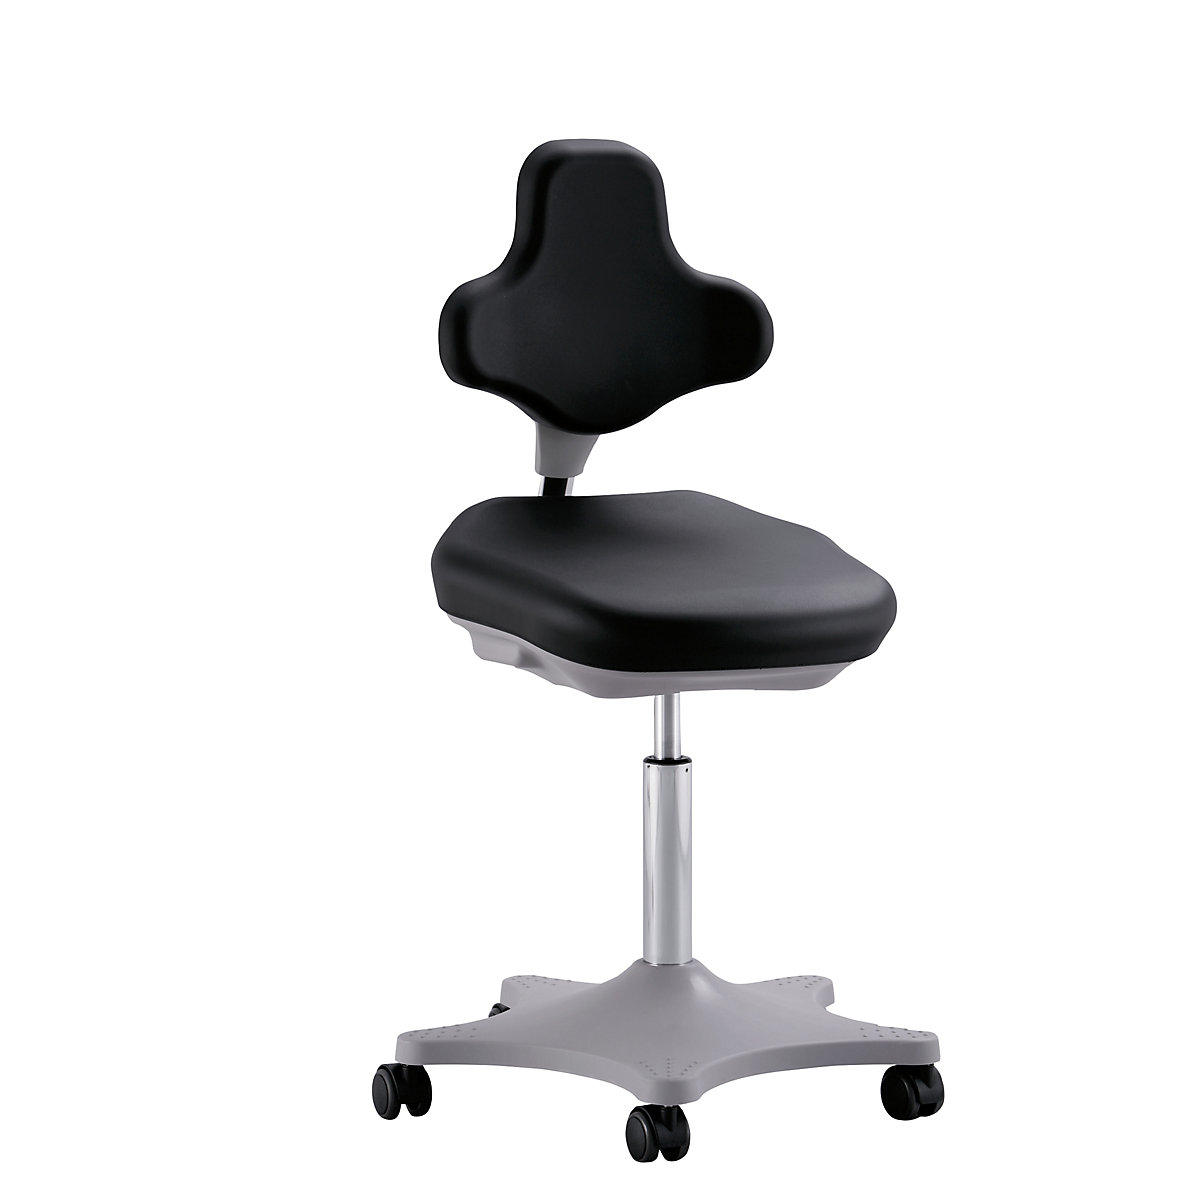 LABSTER laboratory swivel chair – bimos, height adjustable 460 – 650 mm, with castors, seat and back rest made of polyurethane foam, black-2